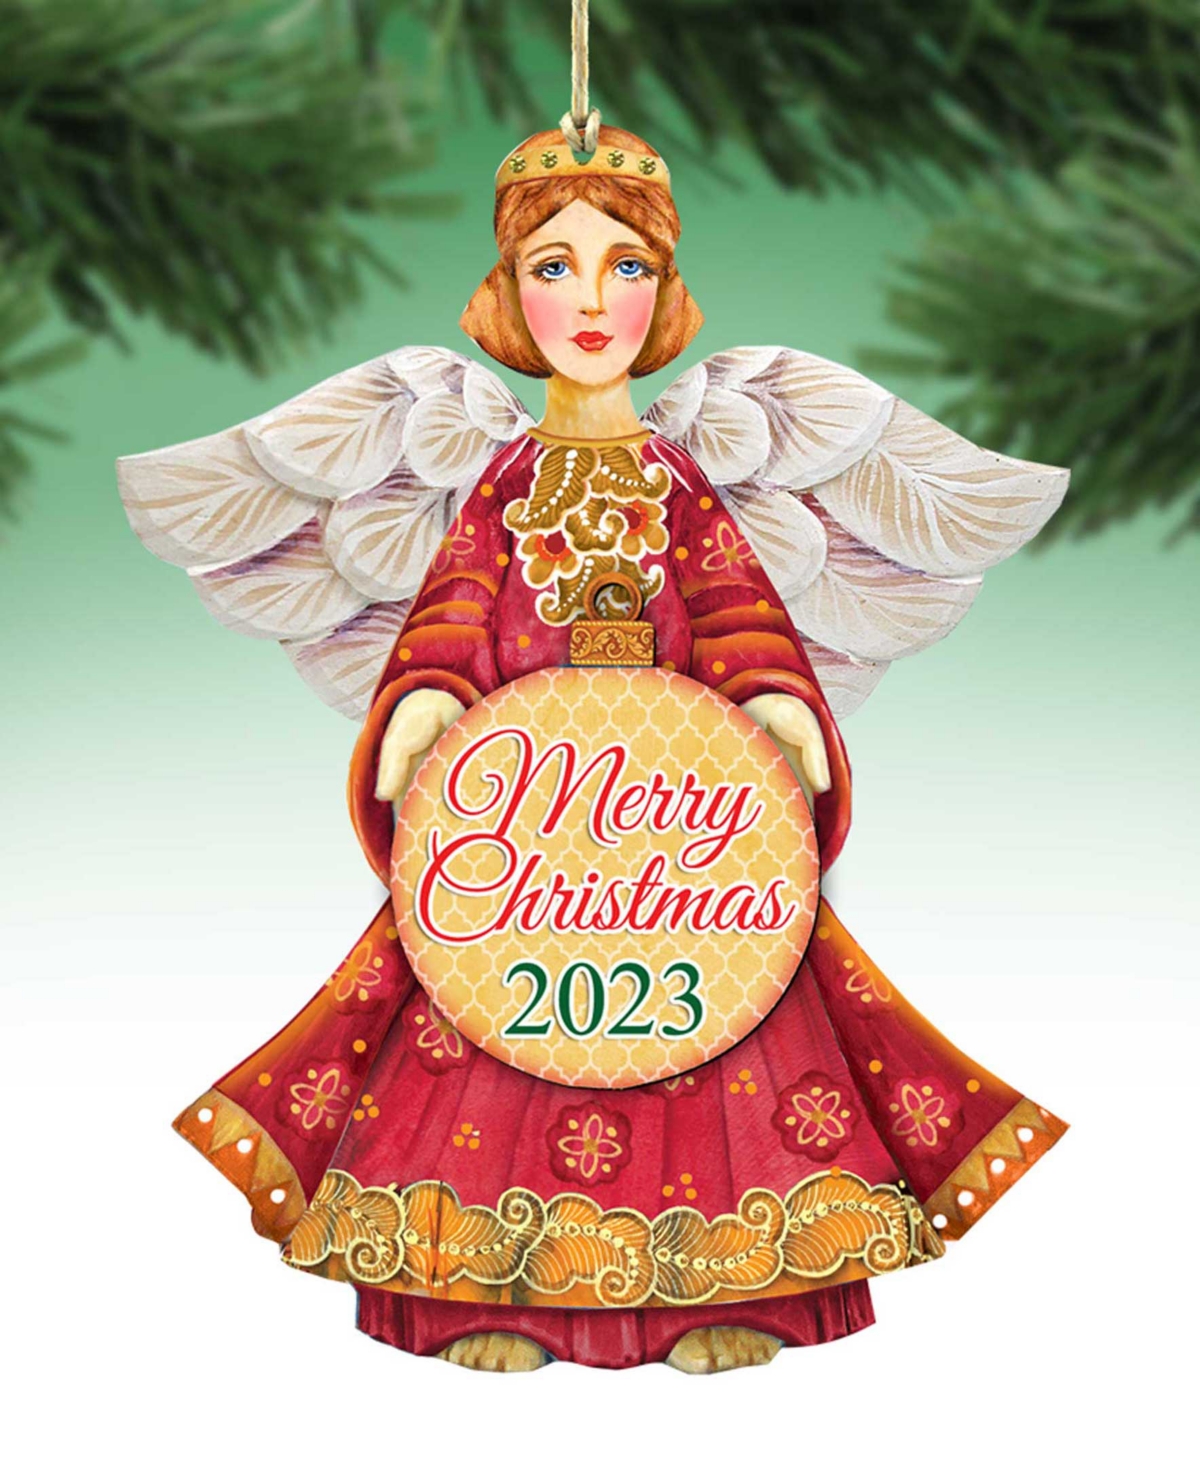 Designocracy 2023 Dated Angel Christmas Wooden Ornaments Holiday Decor Set Of 2 G. Debrekht In Multi Color